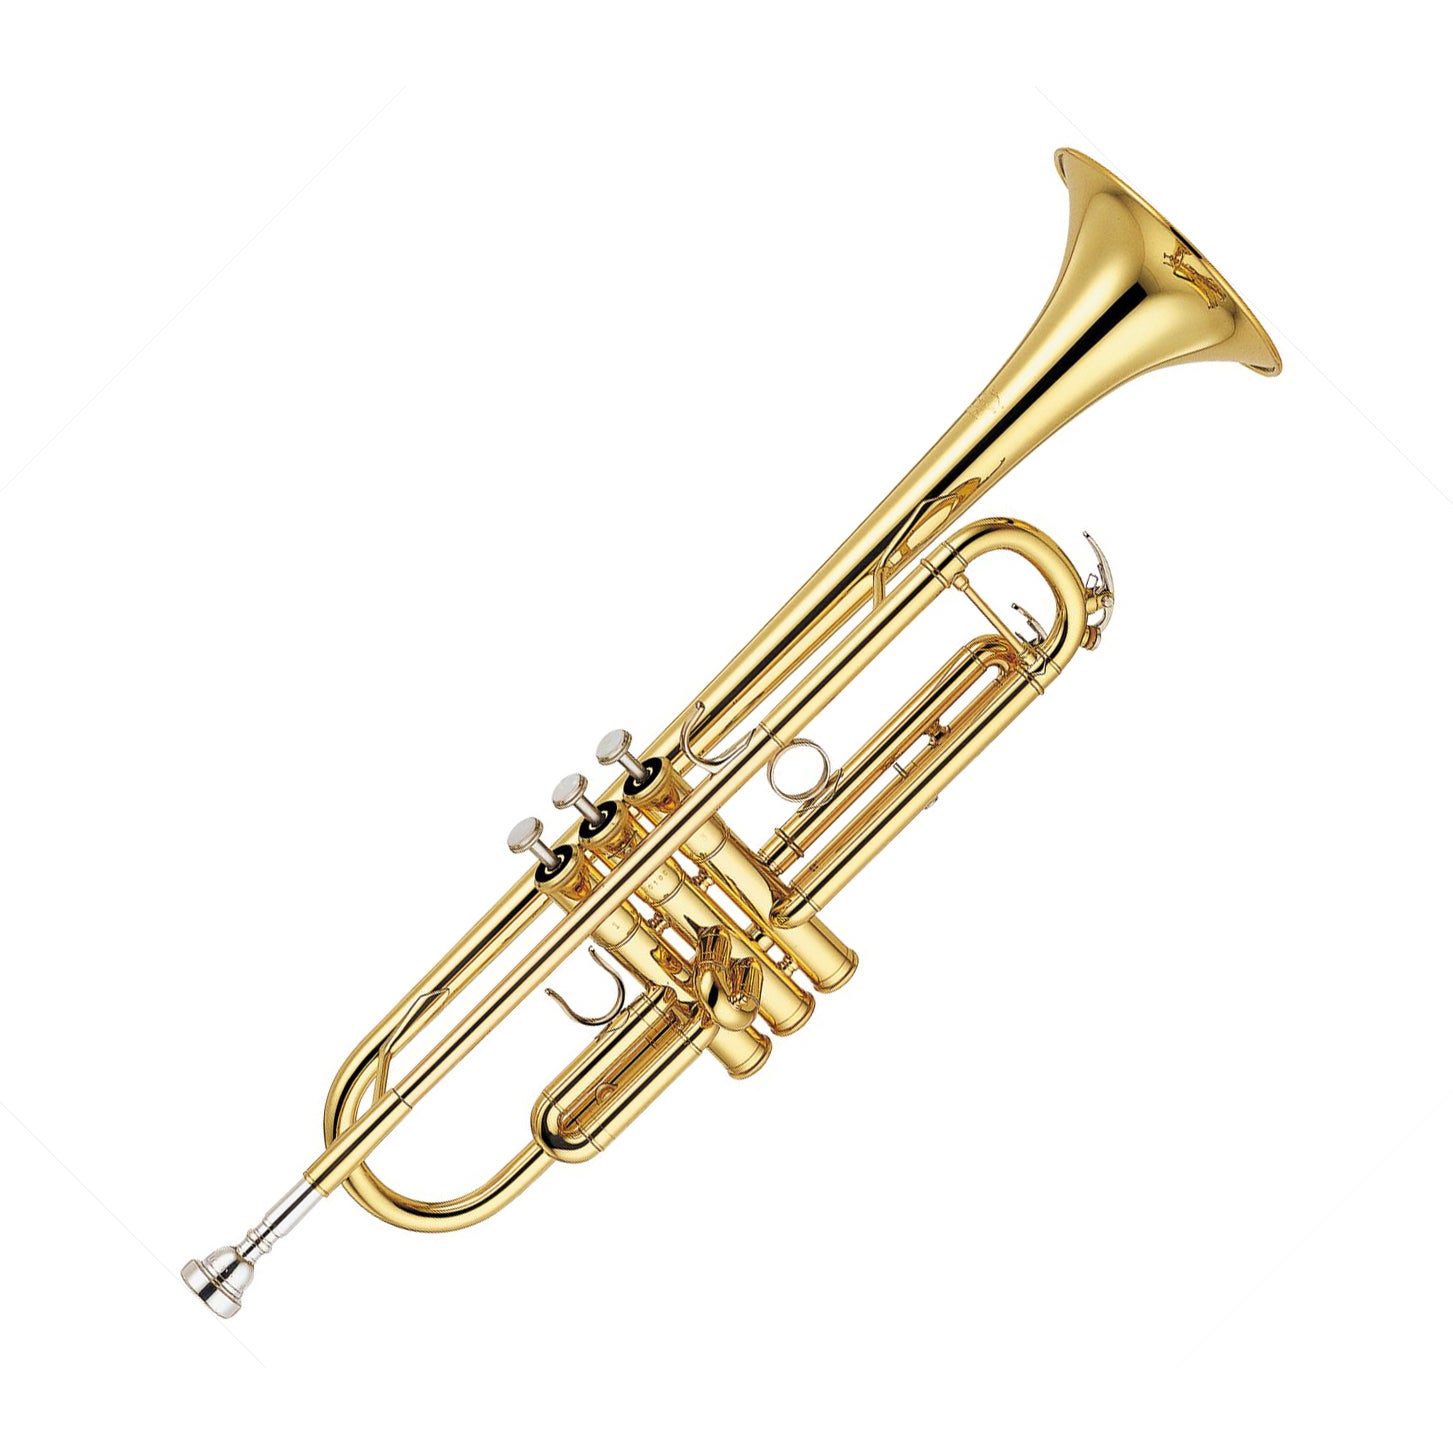 https://www.musicworks.co.nz/content/products/yamaha-ytr6345-g-trumpet-gold-brass-bell-gold-lacquer-pro-model-1-ytr6345g.jpg?canvas=1:1&width=2500